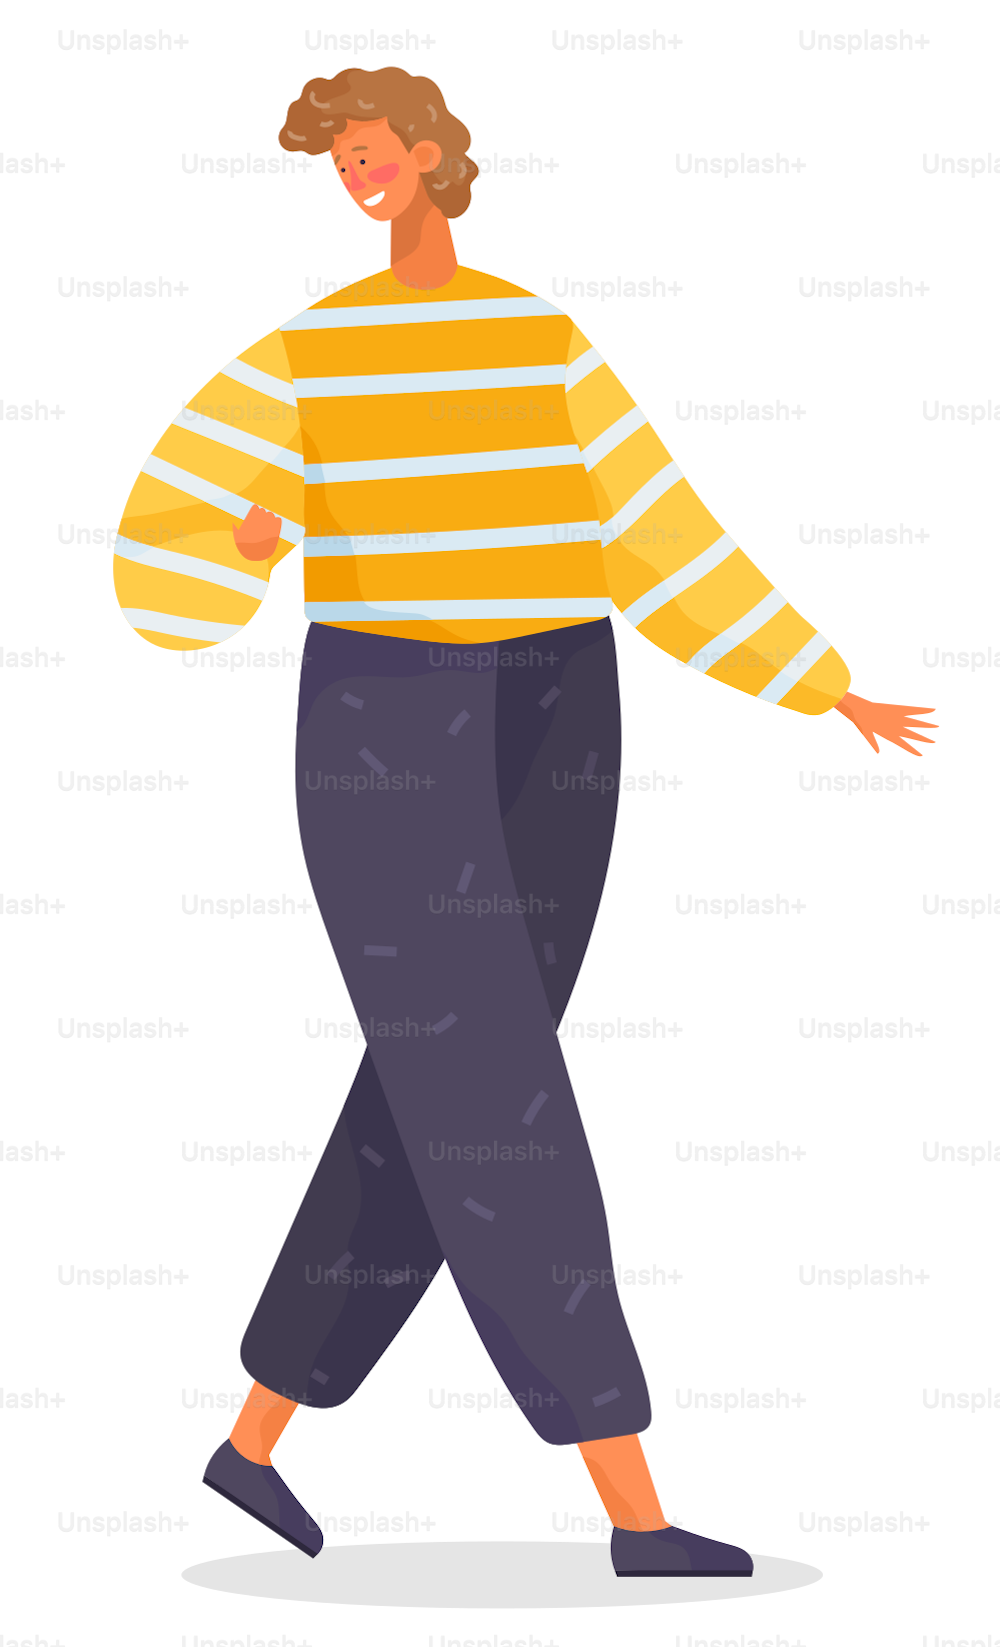 Boy walking alone, person isolated on white background. Young man dressed in casual clothes like shirt or sweater and pants. Guy posing and smiling for picture. Vector illustration in flat style